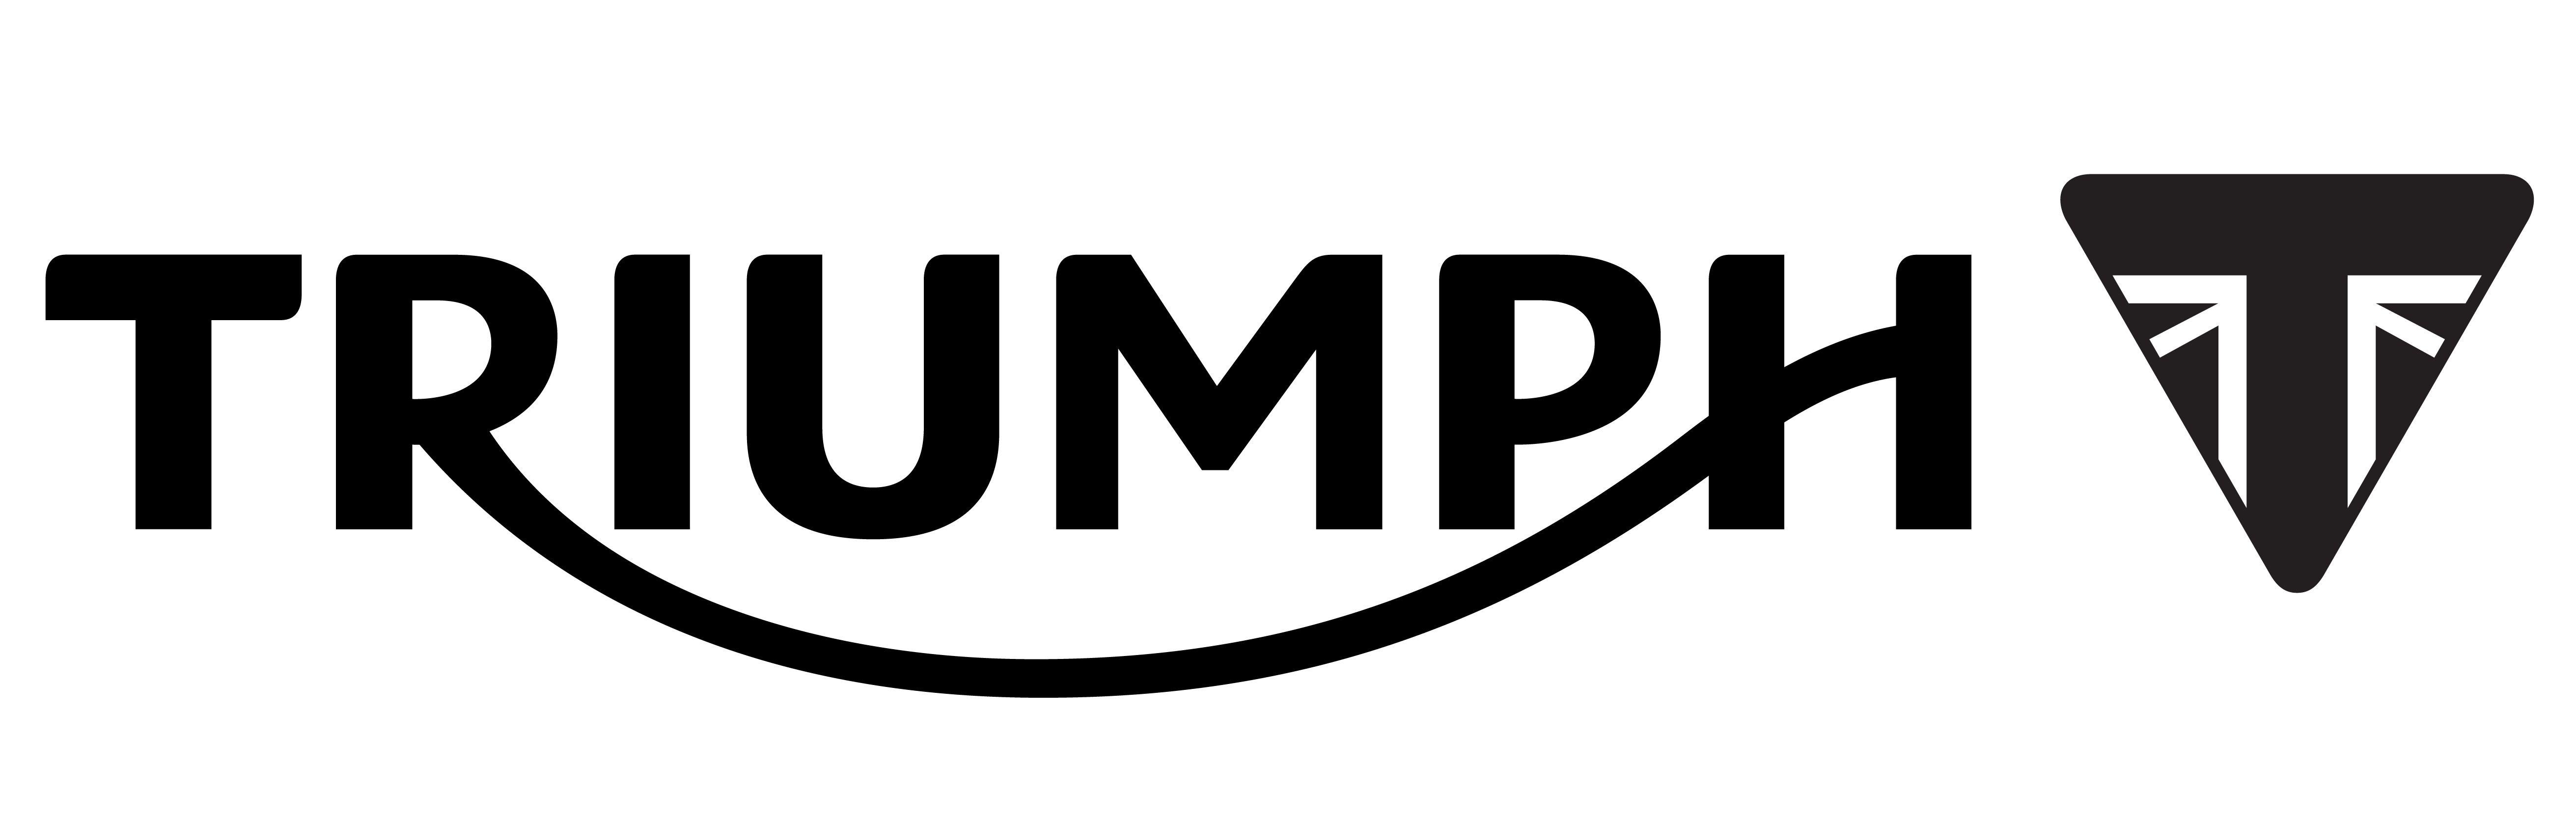 New Triumph Motorcycle Logo - Triumph logo: history, evolution, meaning | Motorcycle Brands